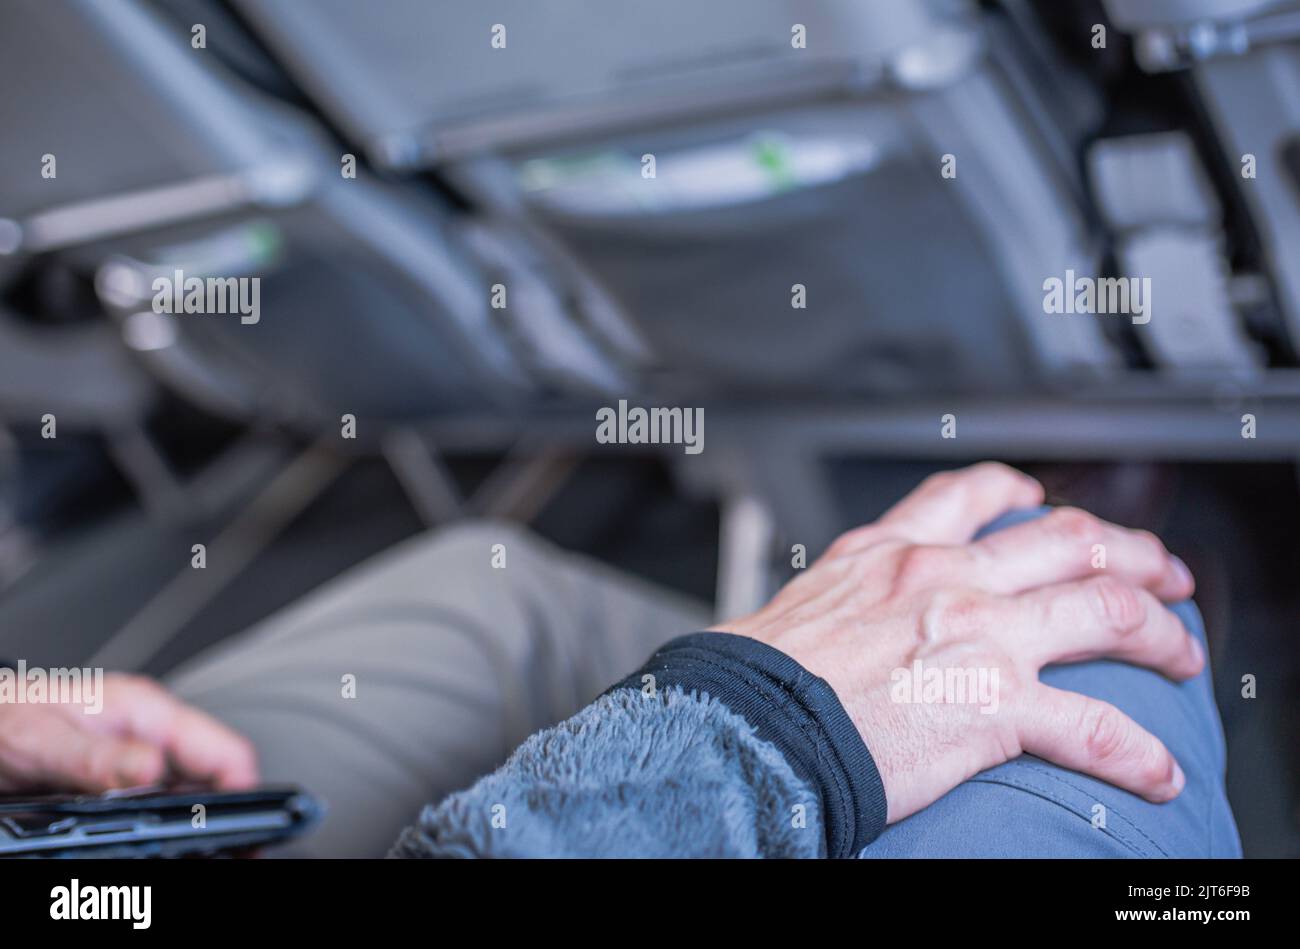 Man expresses fear of flying by gripping partner's knee. Stock Photo